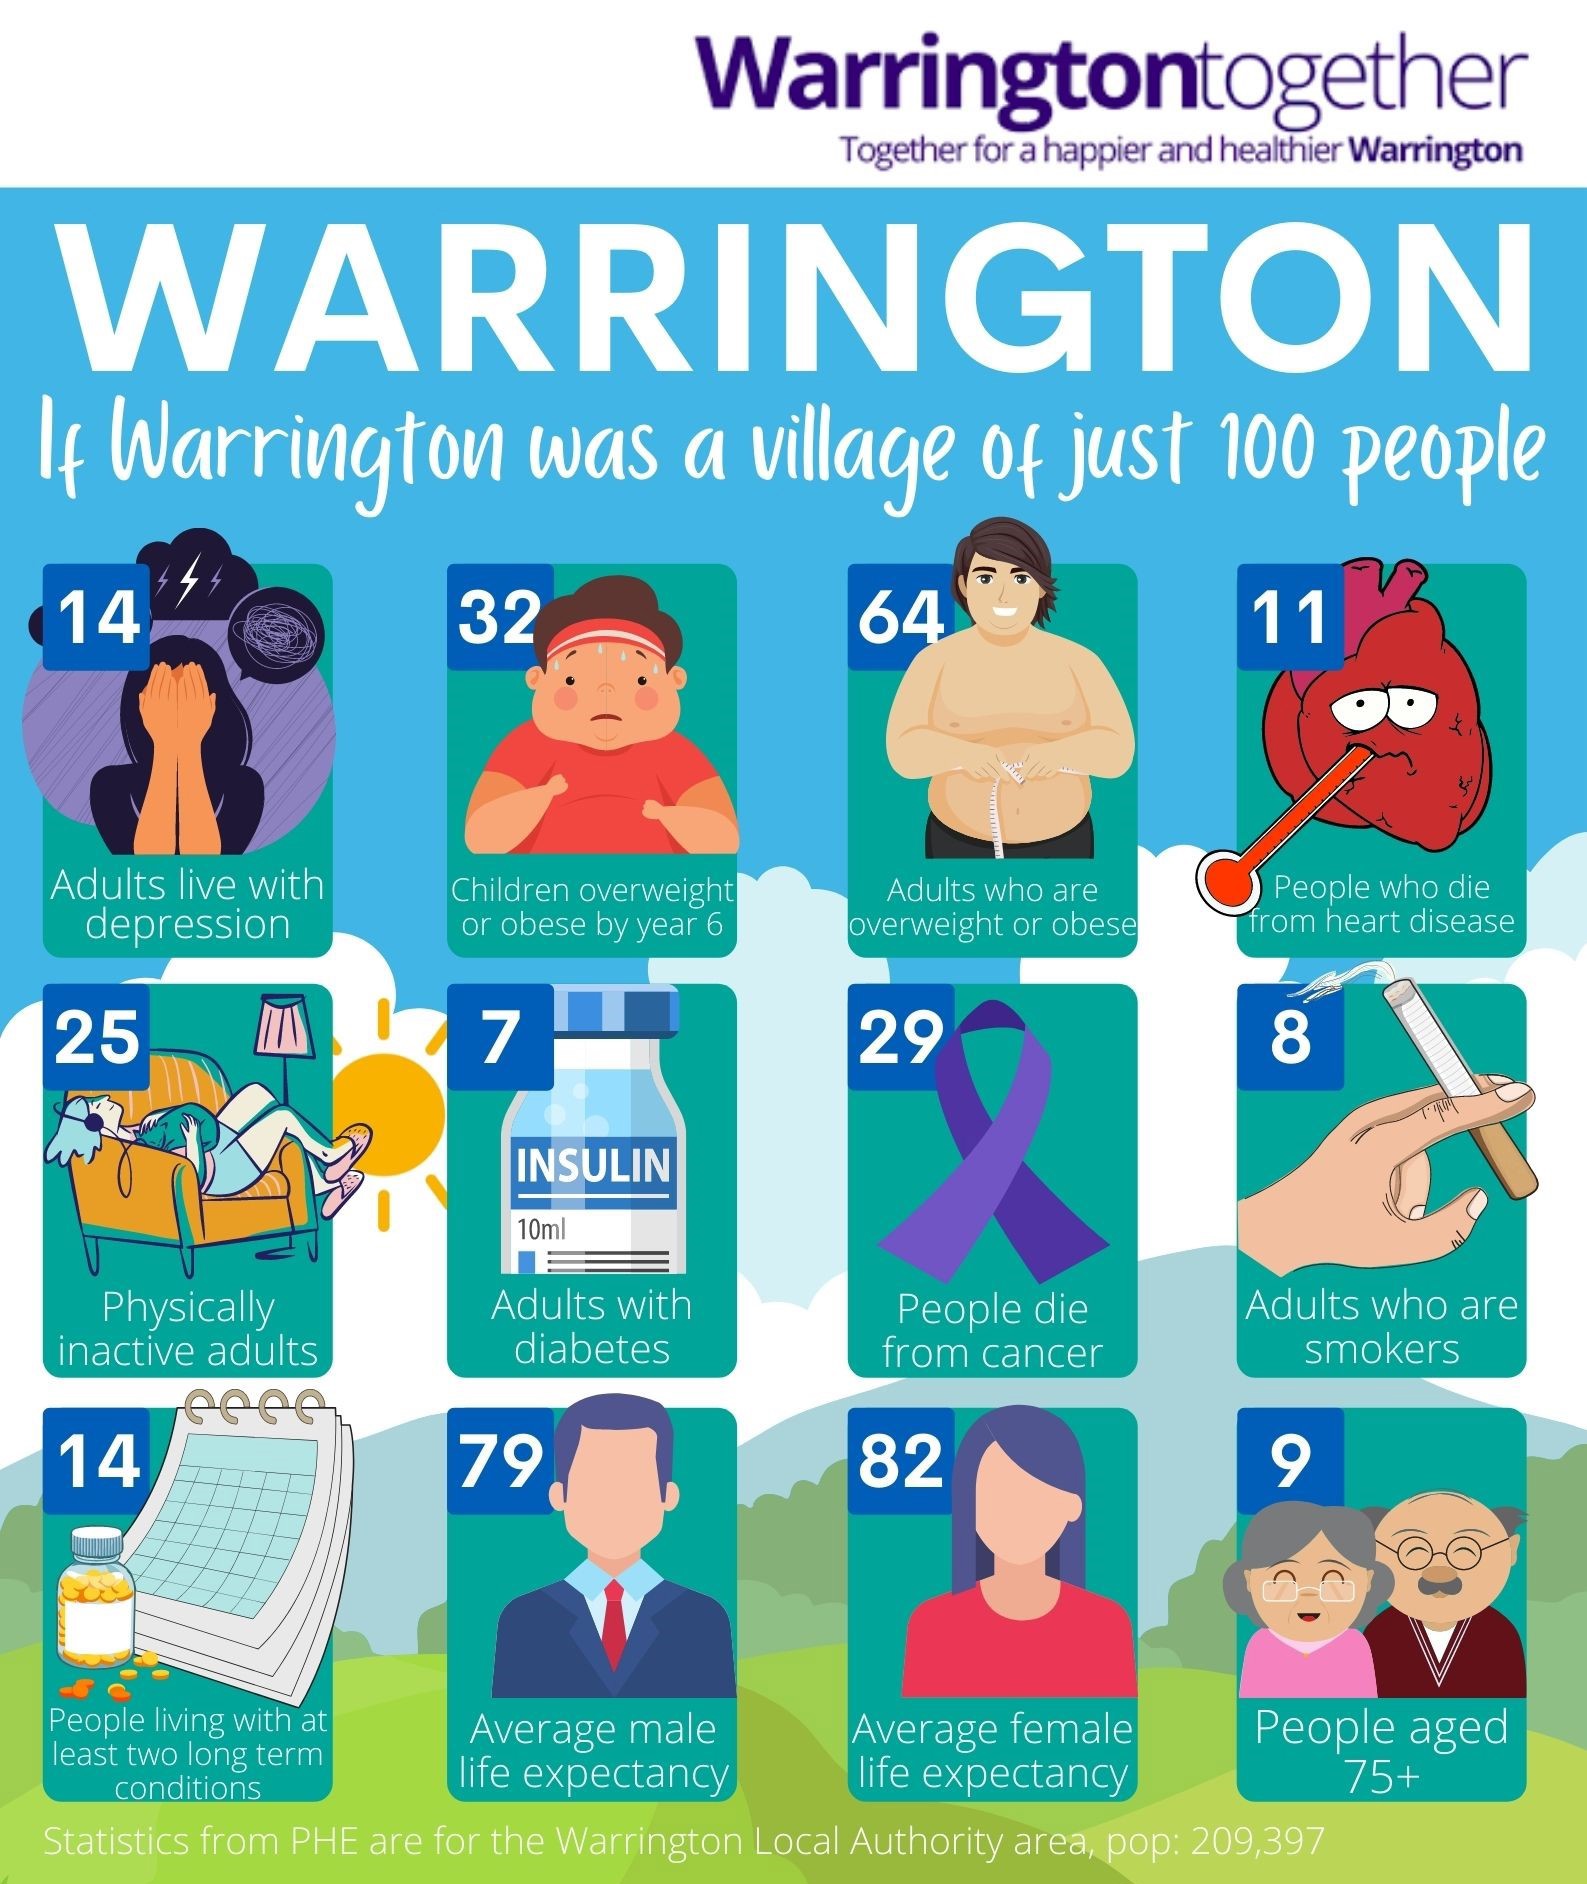 Image showing the statistics if Warrington was only 100 people